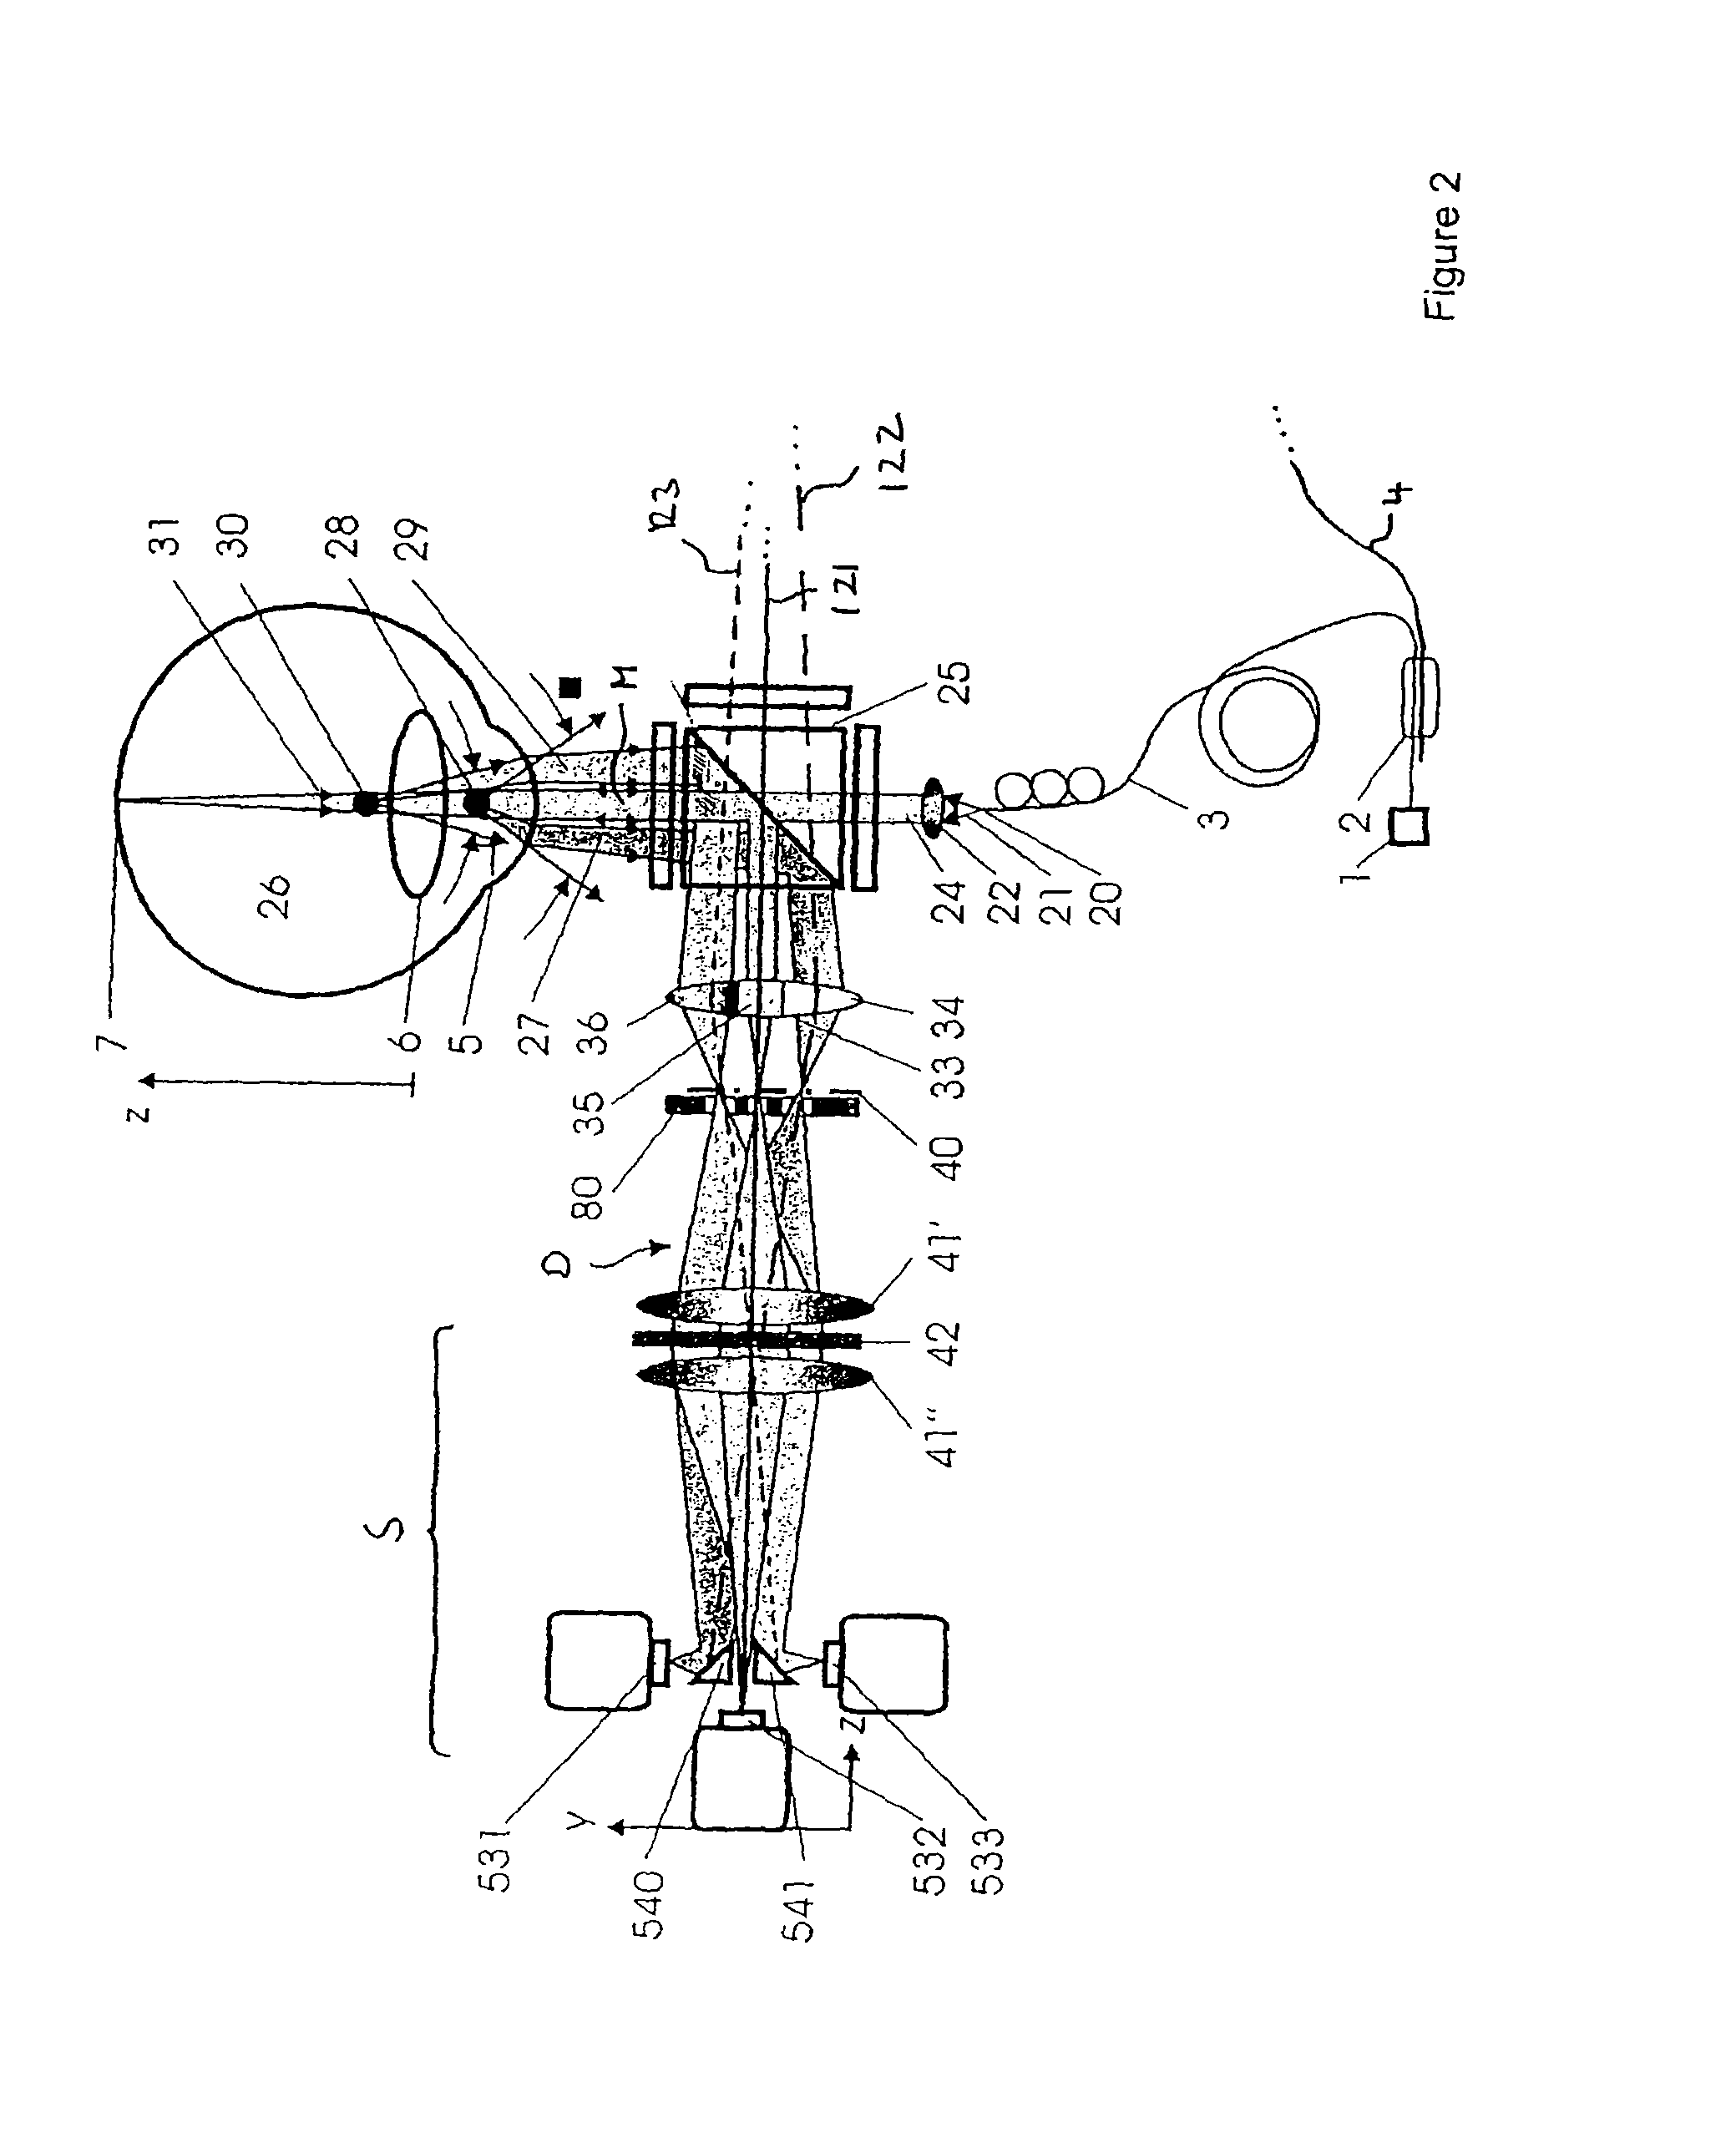 Apparatus and method for interferometric measurement of a sample